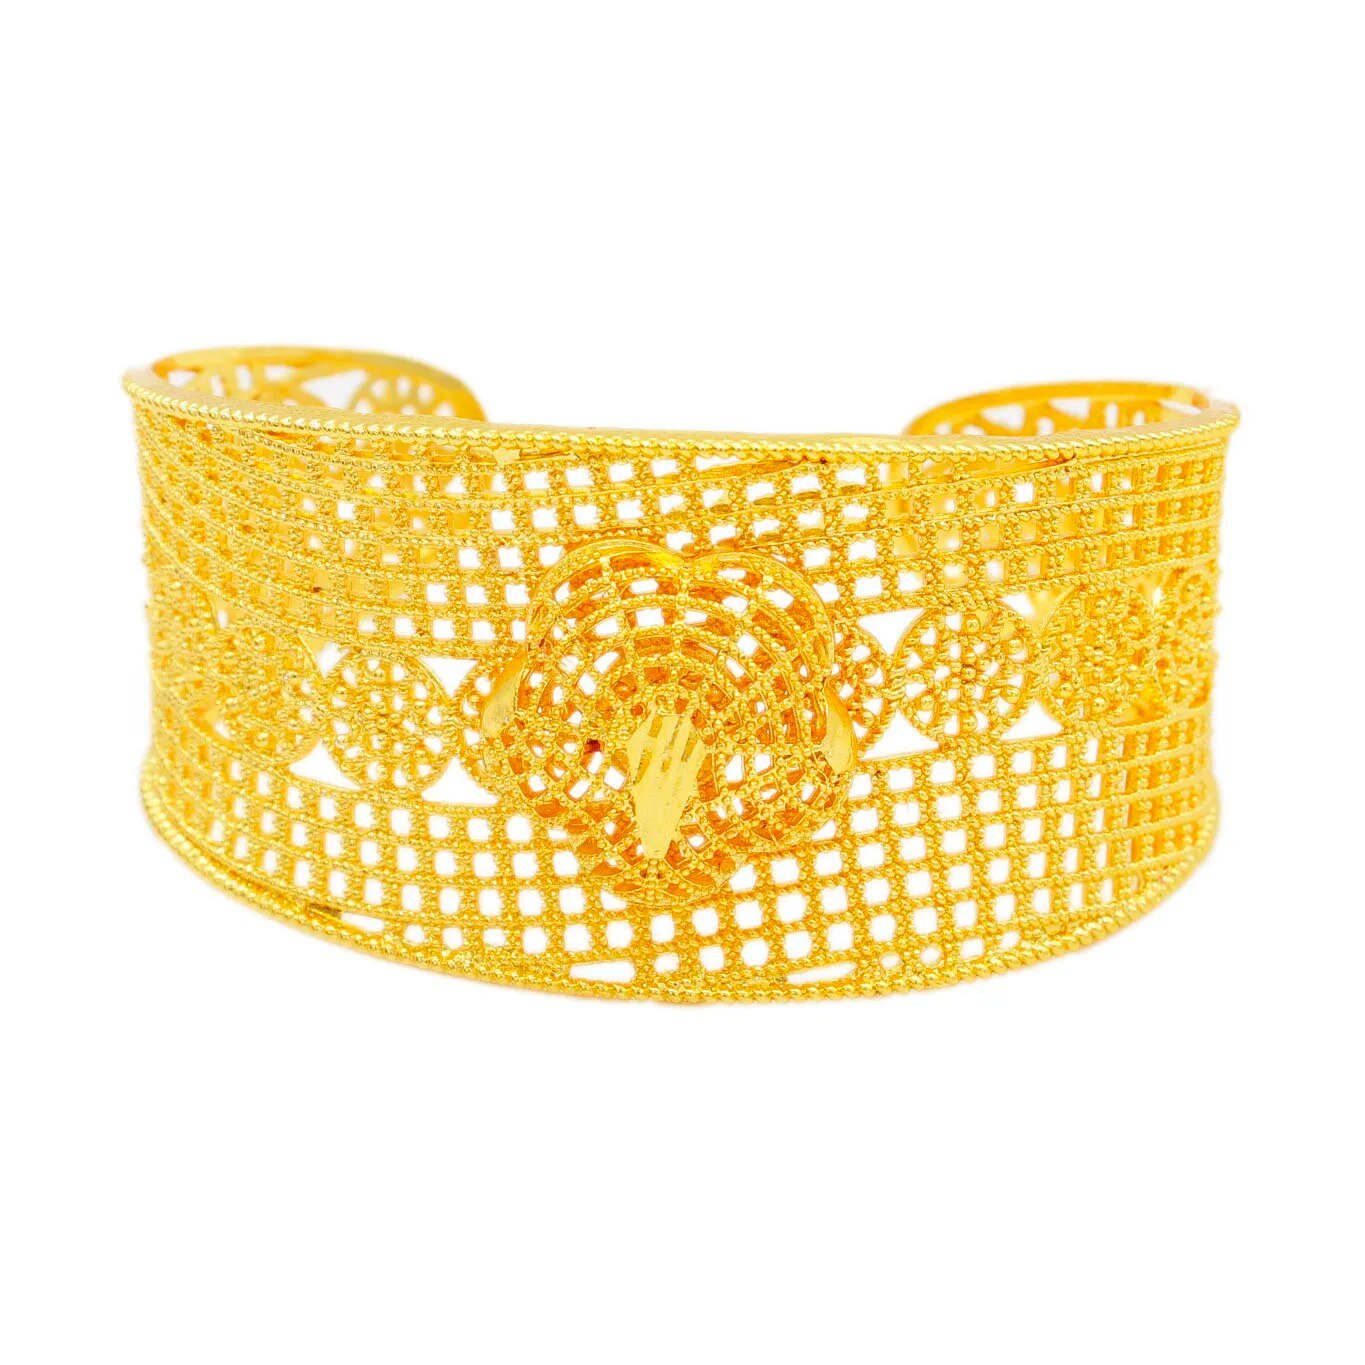 Cuff Bracelets for Women Girls Bangle Jewelry African Gold Color Bangle - Flexi Africa - Flexi Africa offers Free Delivery Worldwide - Vibrant African traditional clothing showcasing bold prints and intricate designs